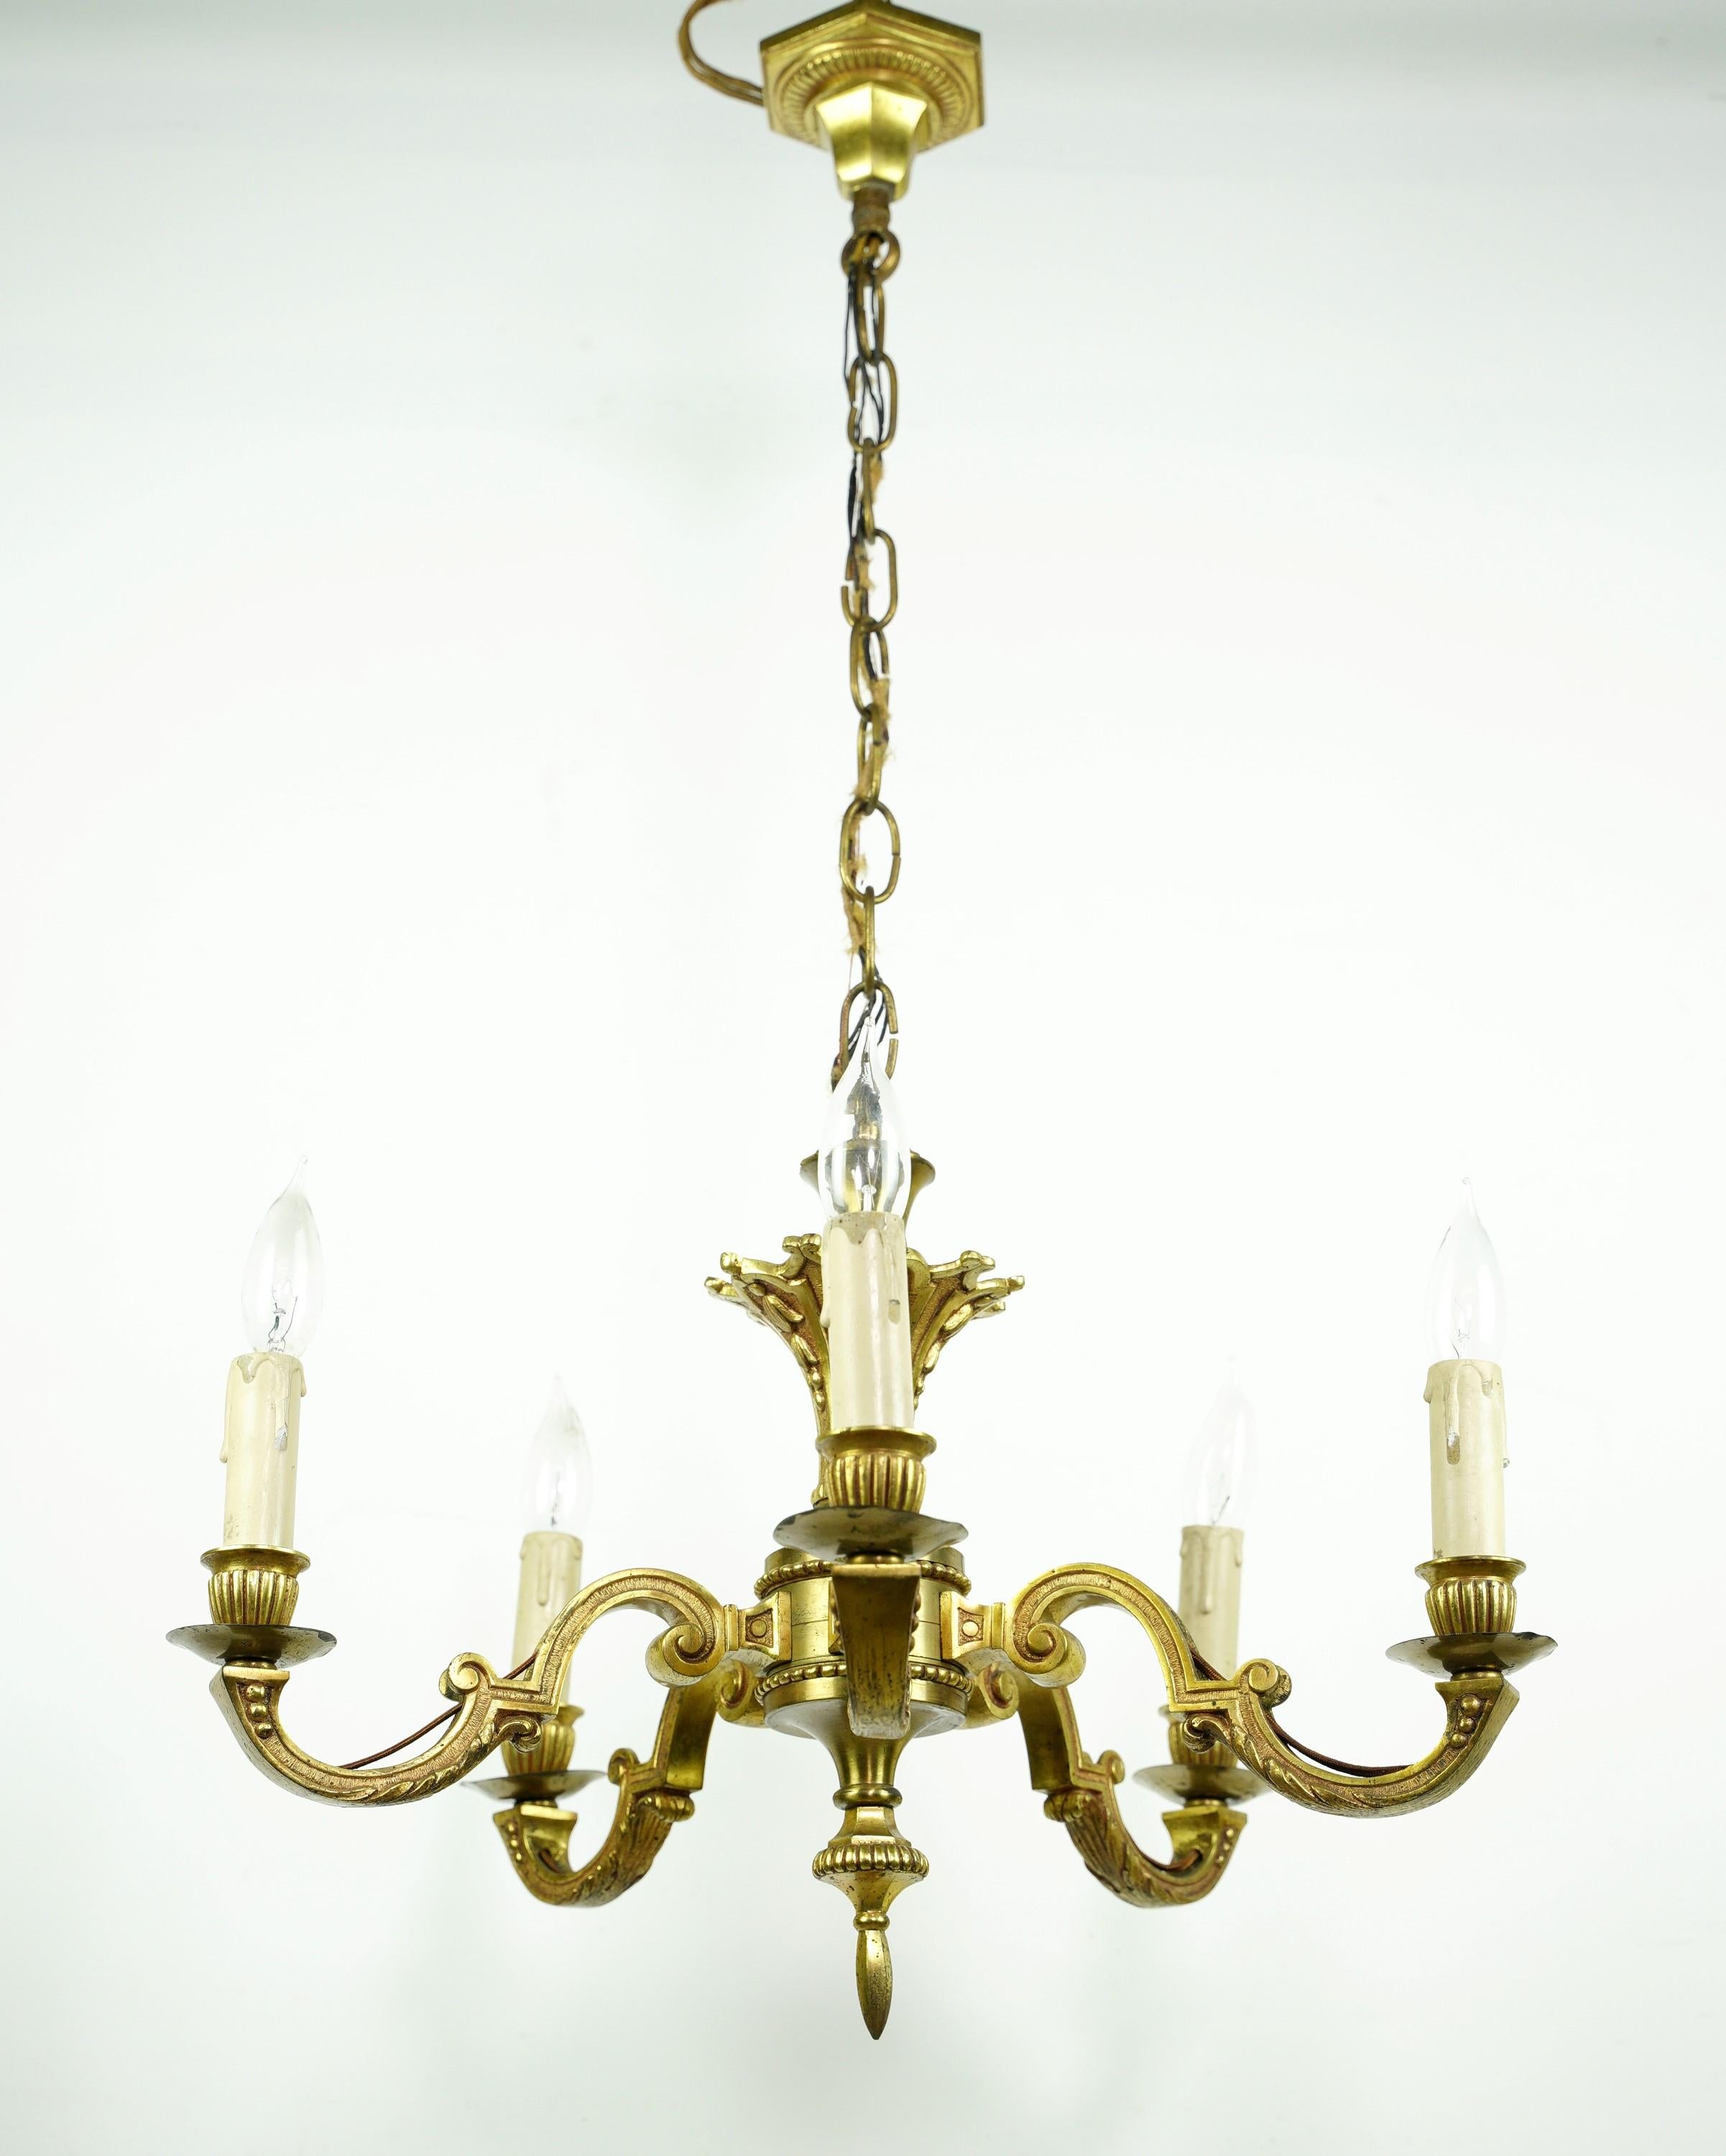 Polished brass five arm chandelier with ornate Art Deco designs. Cleaned and restored. Please note, this item is located in our Scranton, PA location.